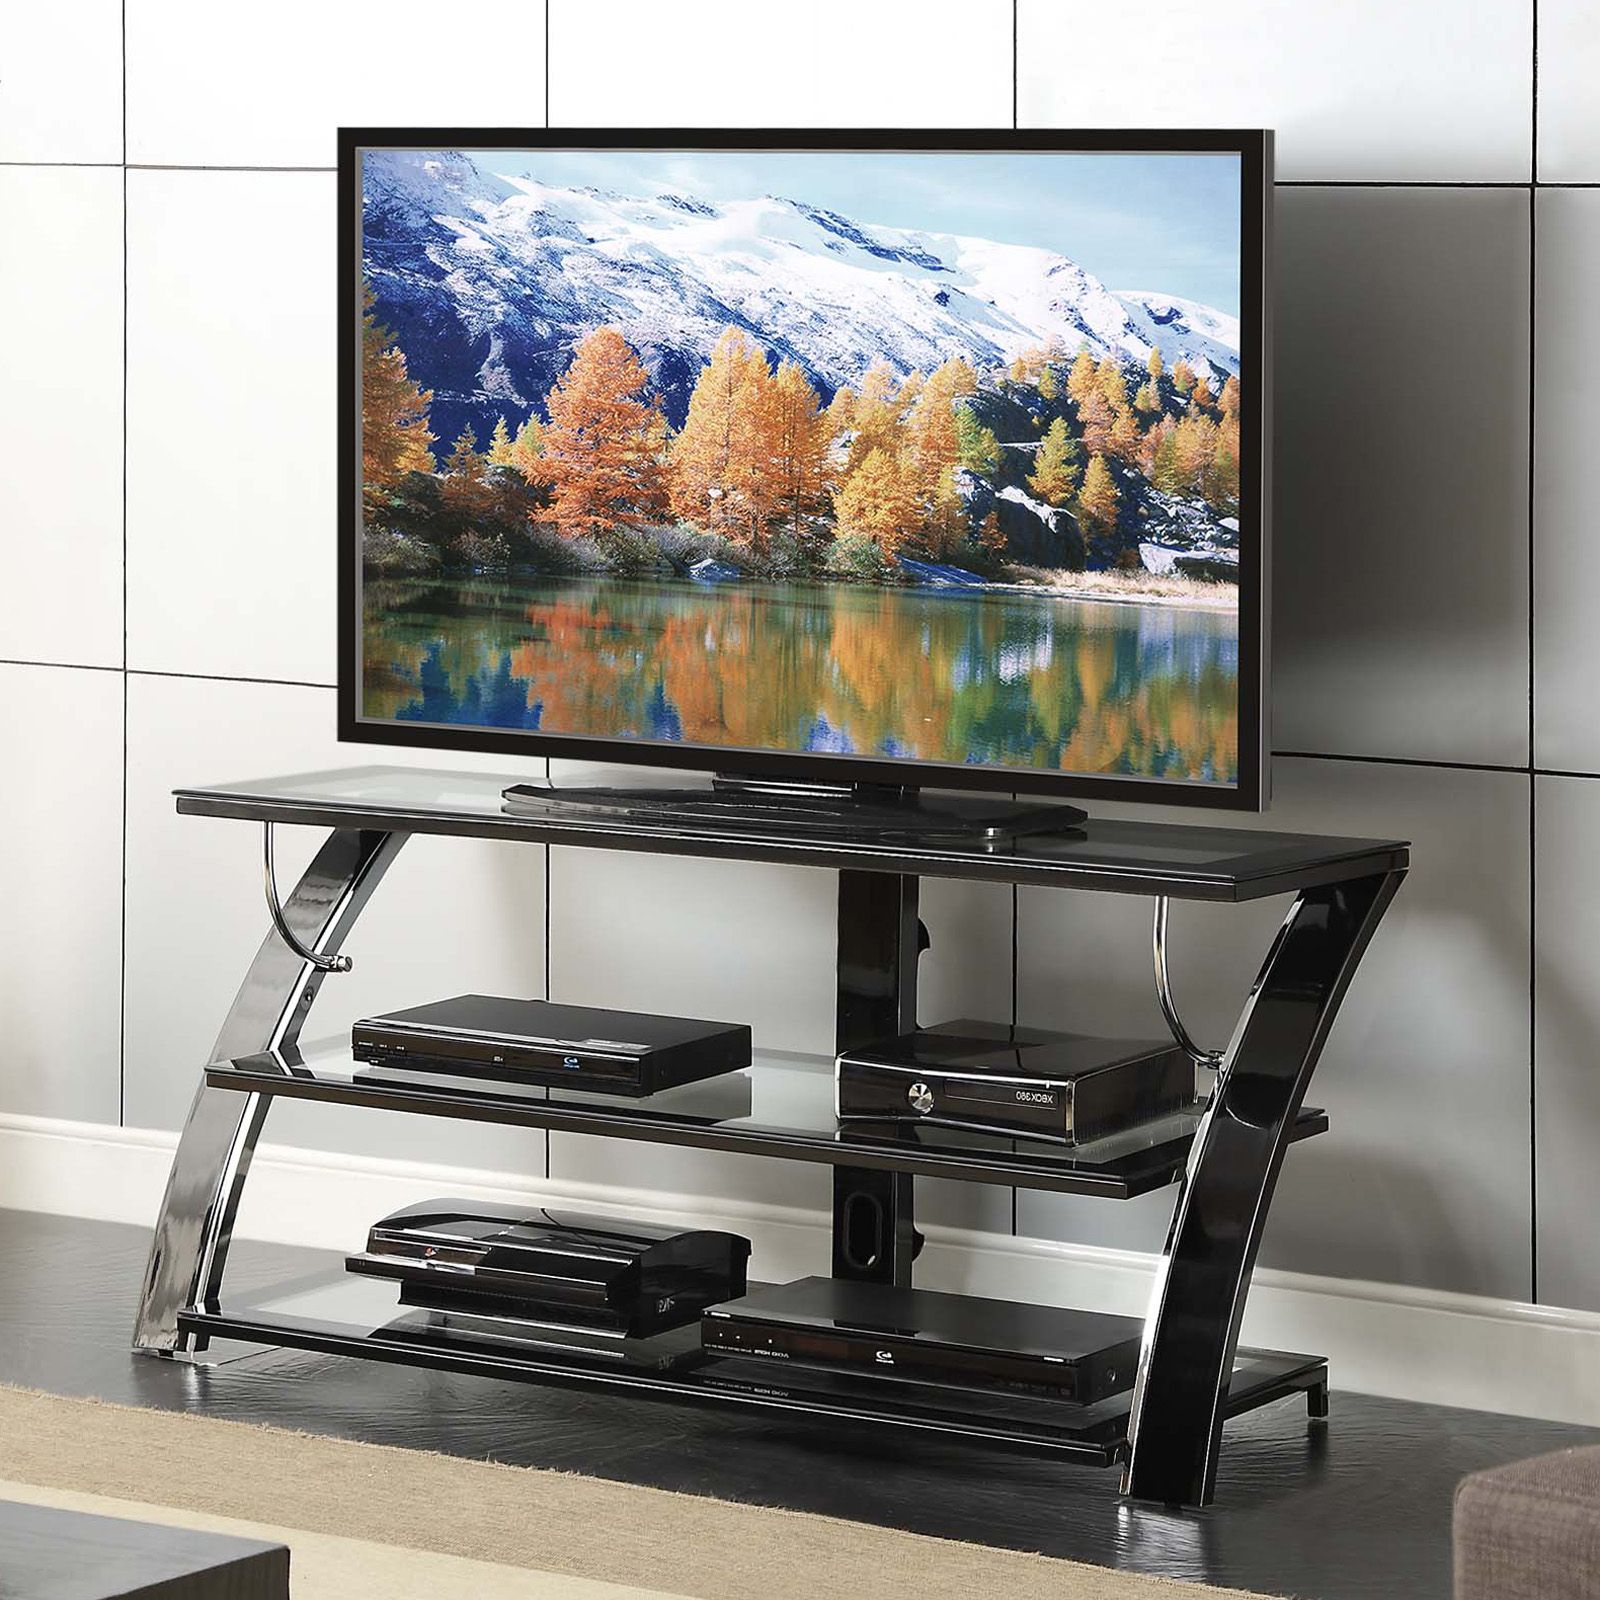 Whalen Camarillo 50 In. Tv Stand – Tv Stands At Hayneedle In Modern Black Tv Stands On Wheels (Gallery 4 of 20)